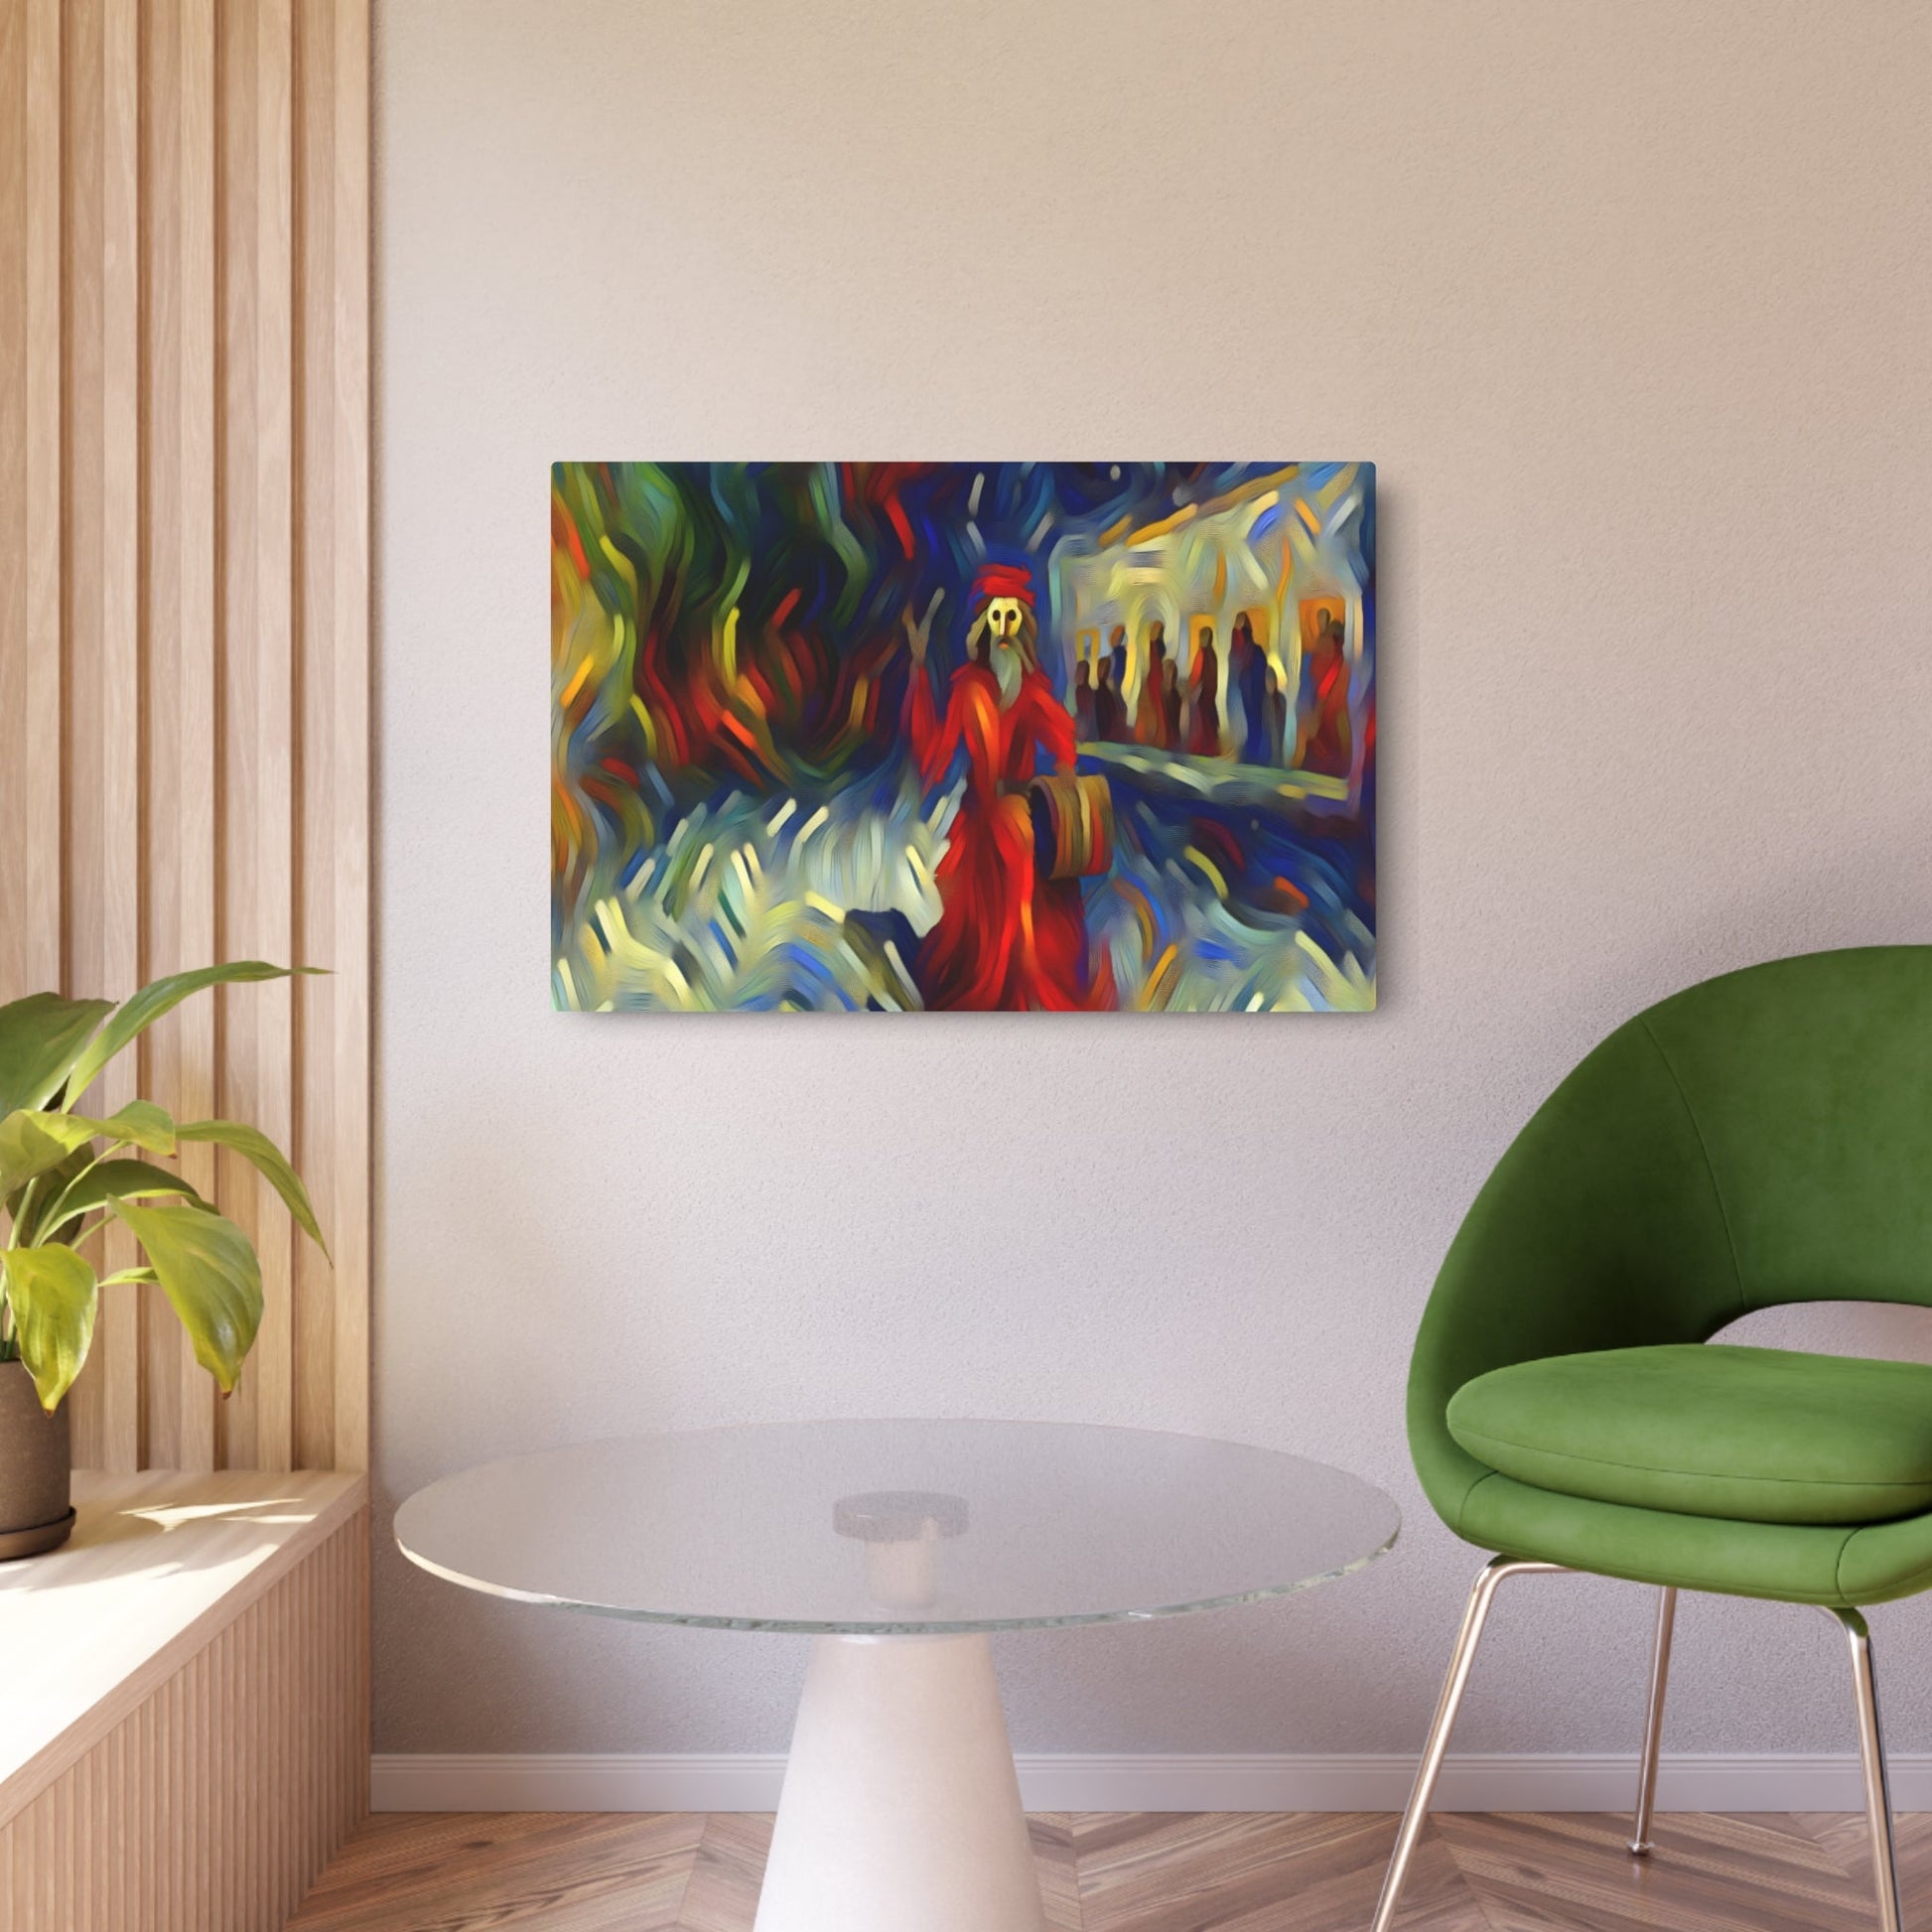 Metal Poster Art | "Expressionism Western Art - Bold and Dramatic Vivid Abstract Scene with Isolated Figure in Chaotic Landscape, Intense Emotional Style" - Metal Poster Art 36″ x 24″ (Horizontal) 0.12''